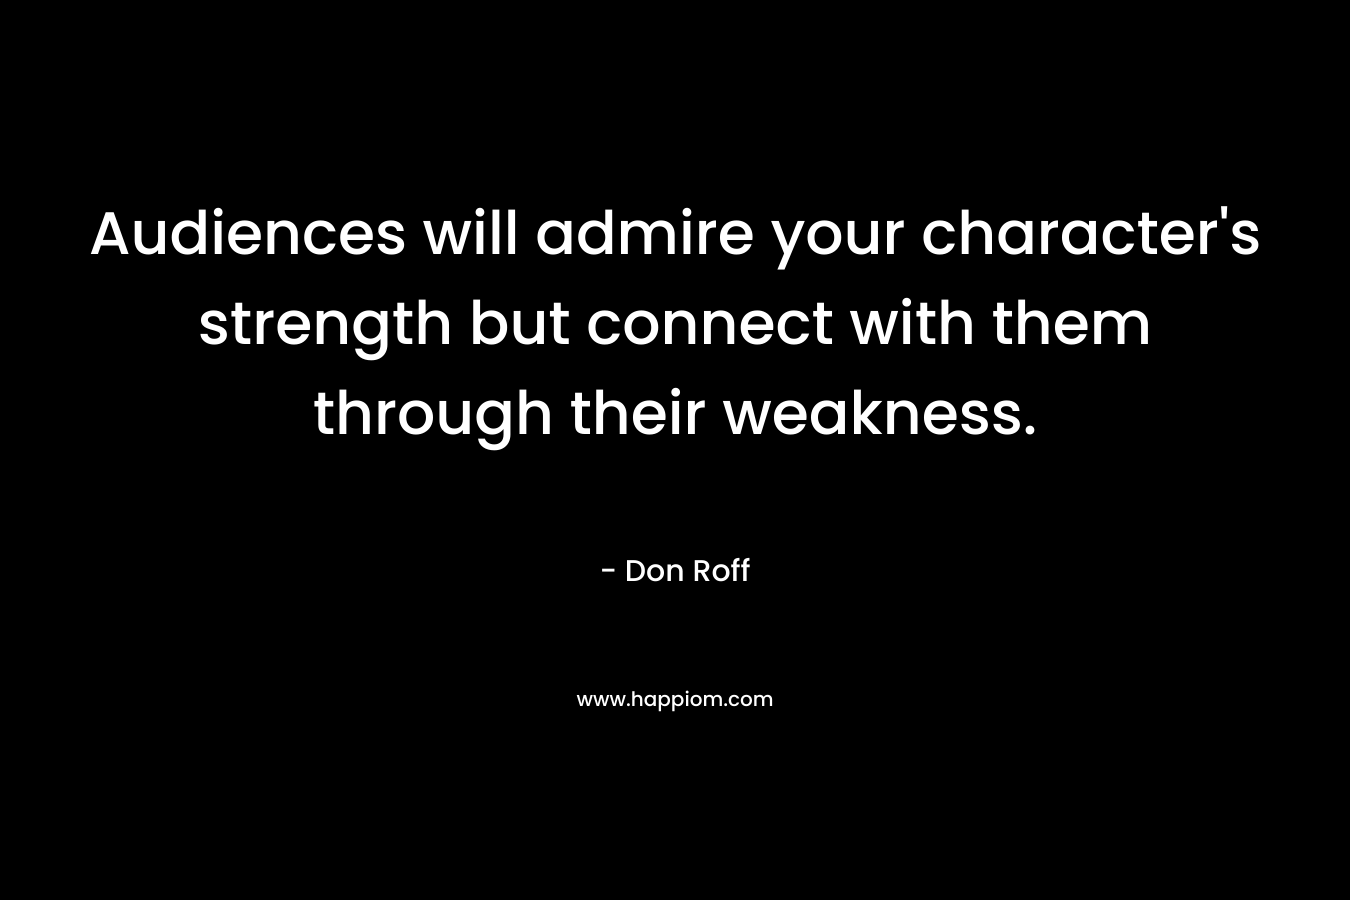 Audiences will admire your character's strength but connect with them through their weakness.